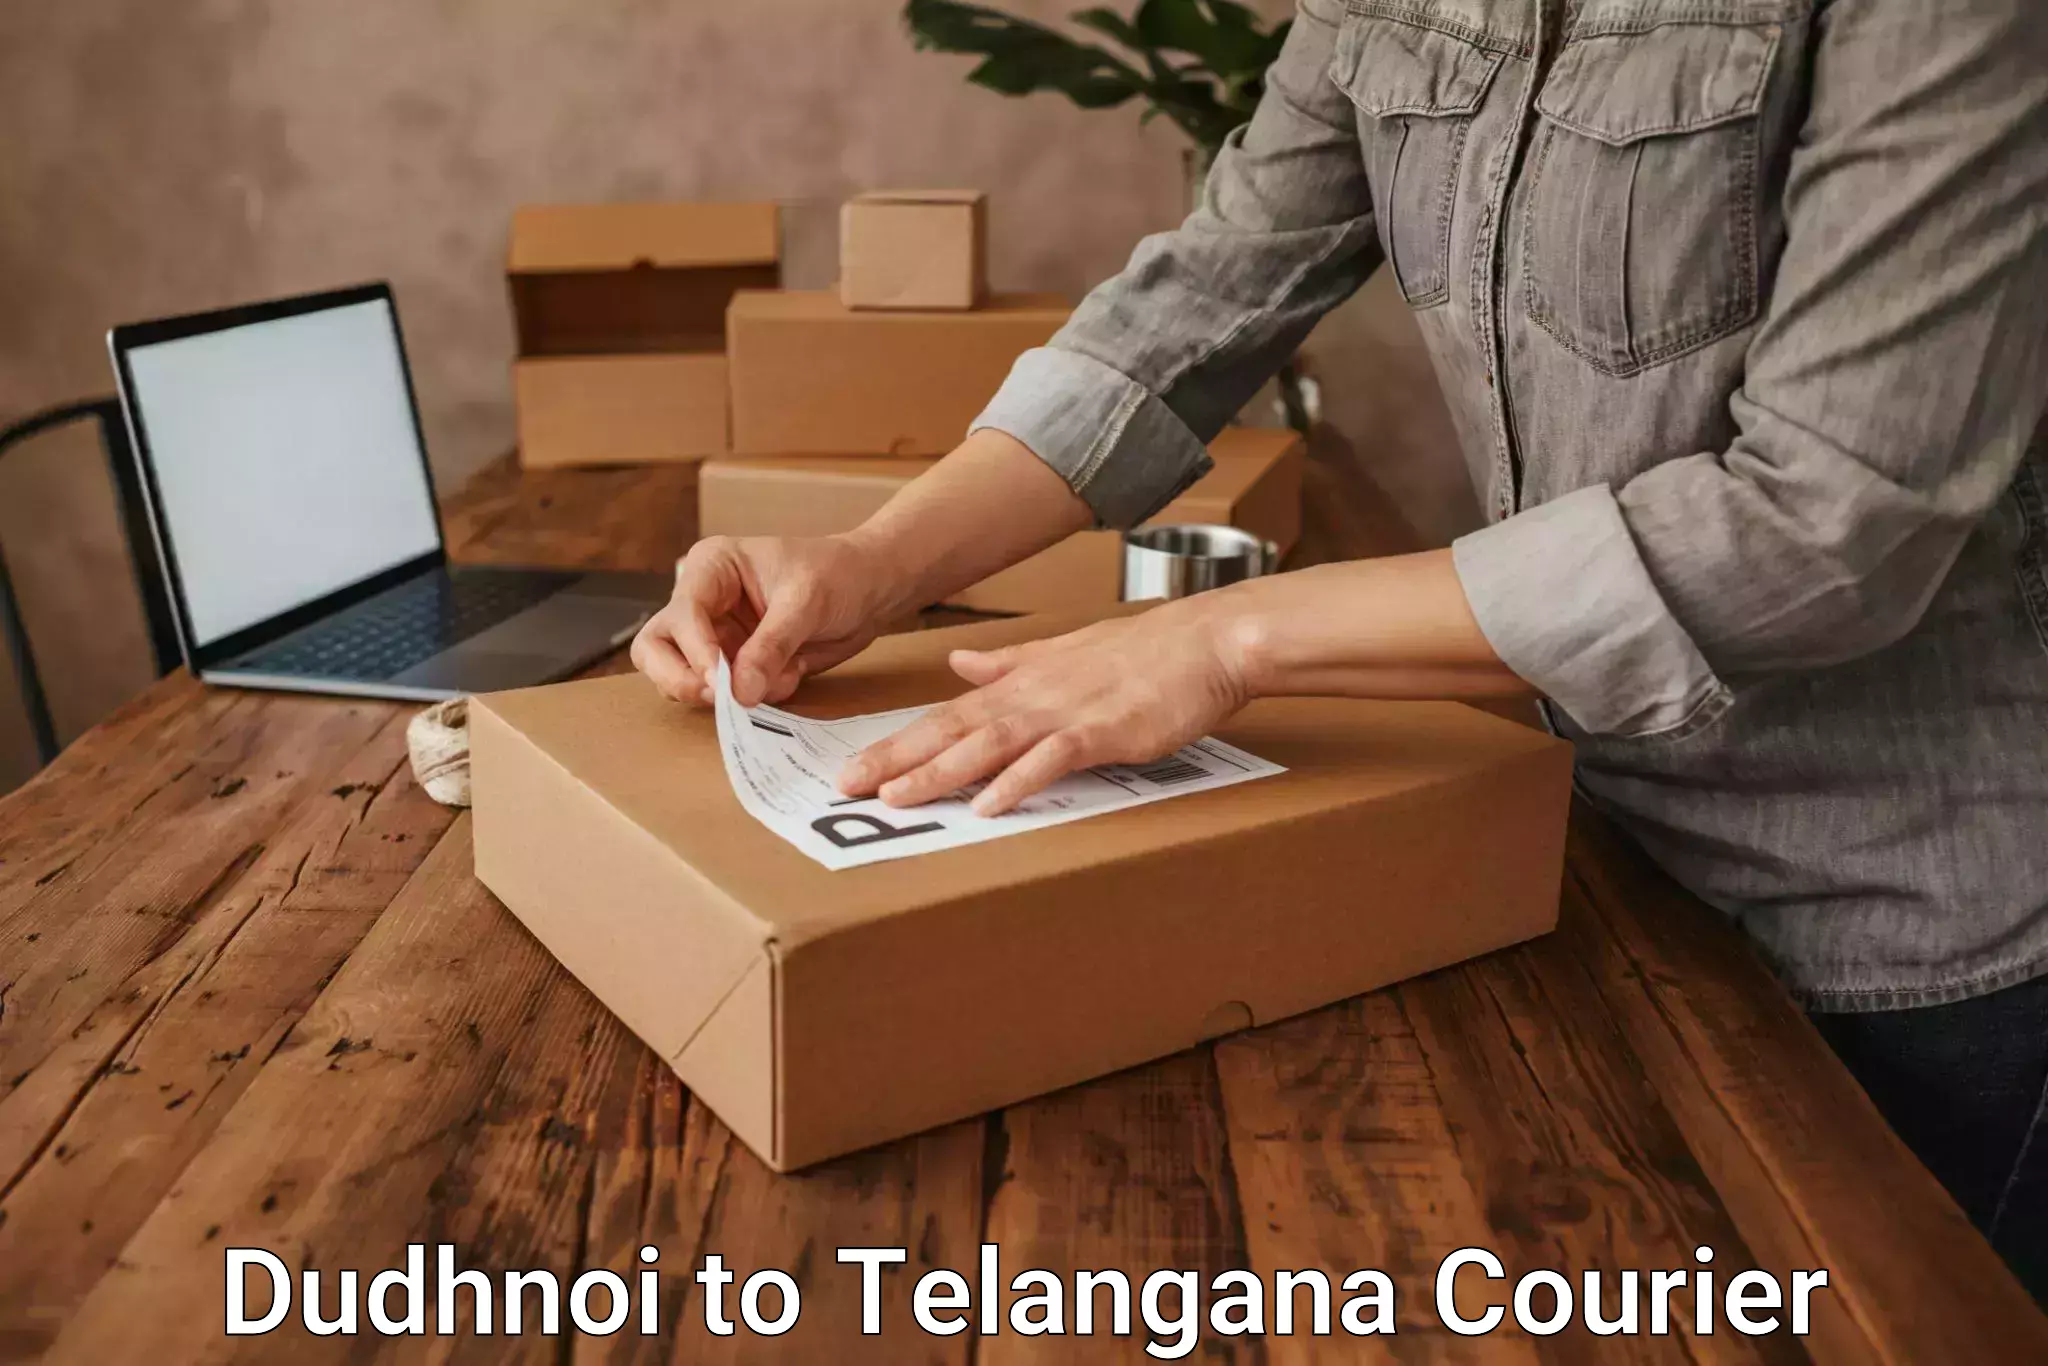 Subscription-based courier Dudhnoi to Patancheru